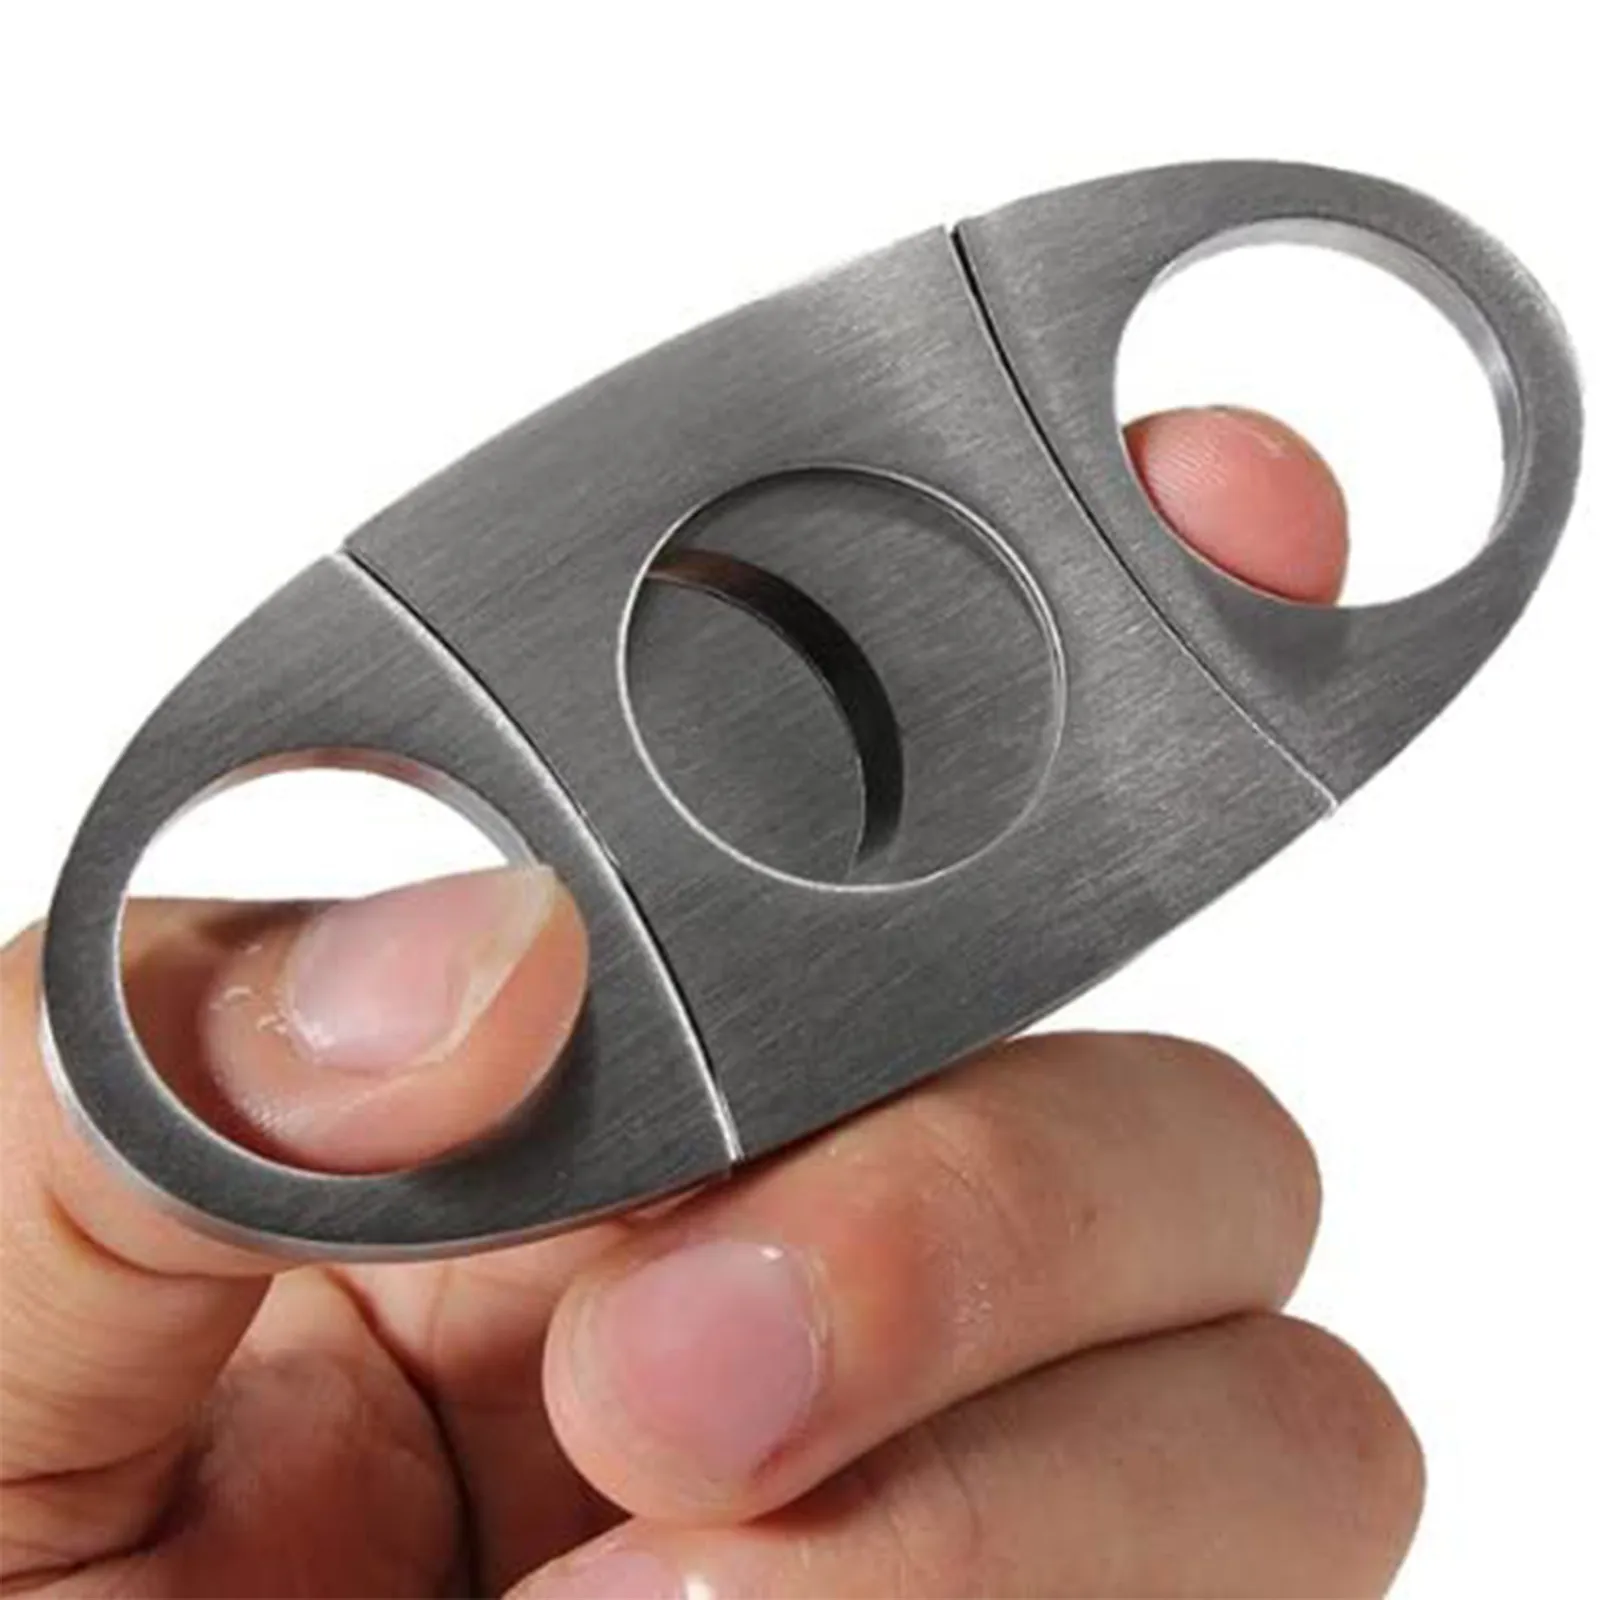 110x64x20mm Cohiba Stainless Steel Cigar Cutter Portable For Smoker Gift Box